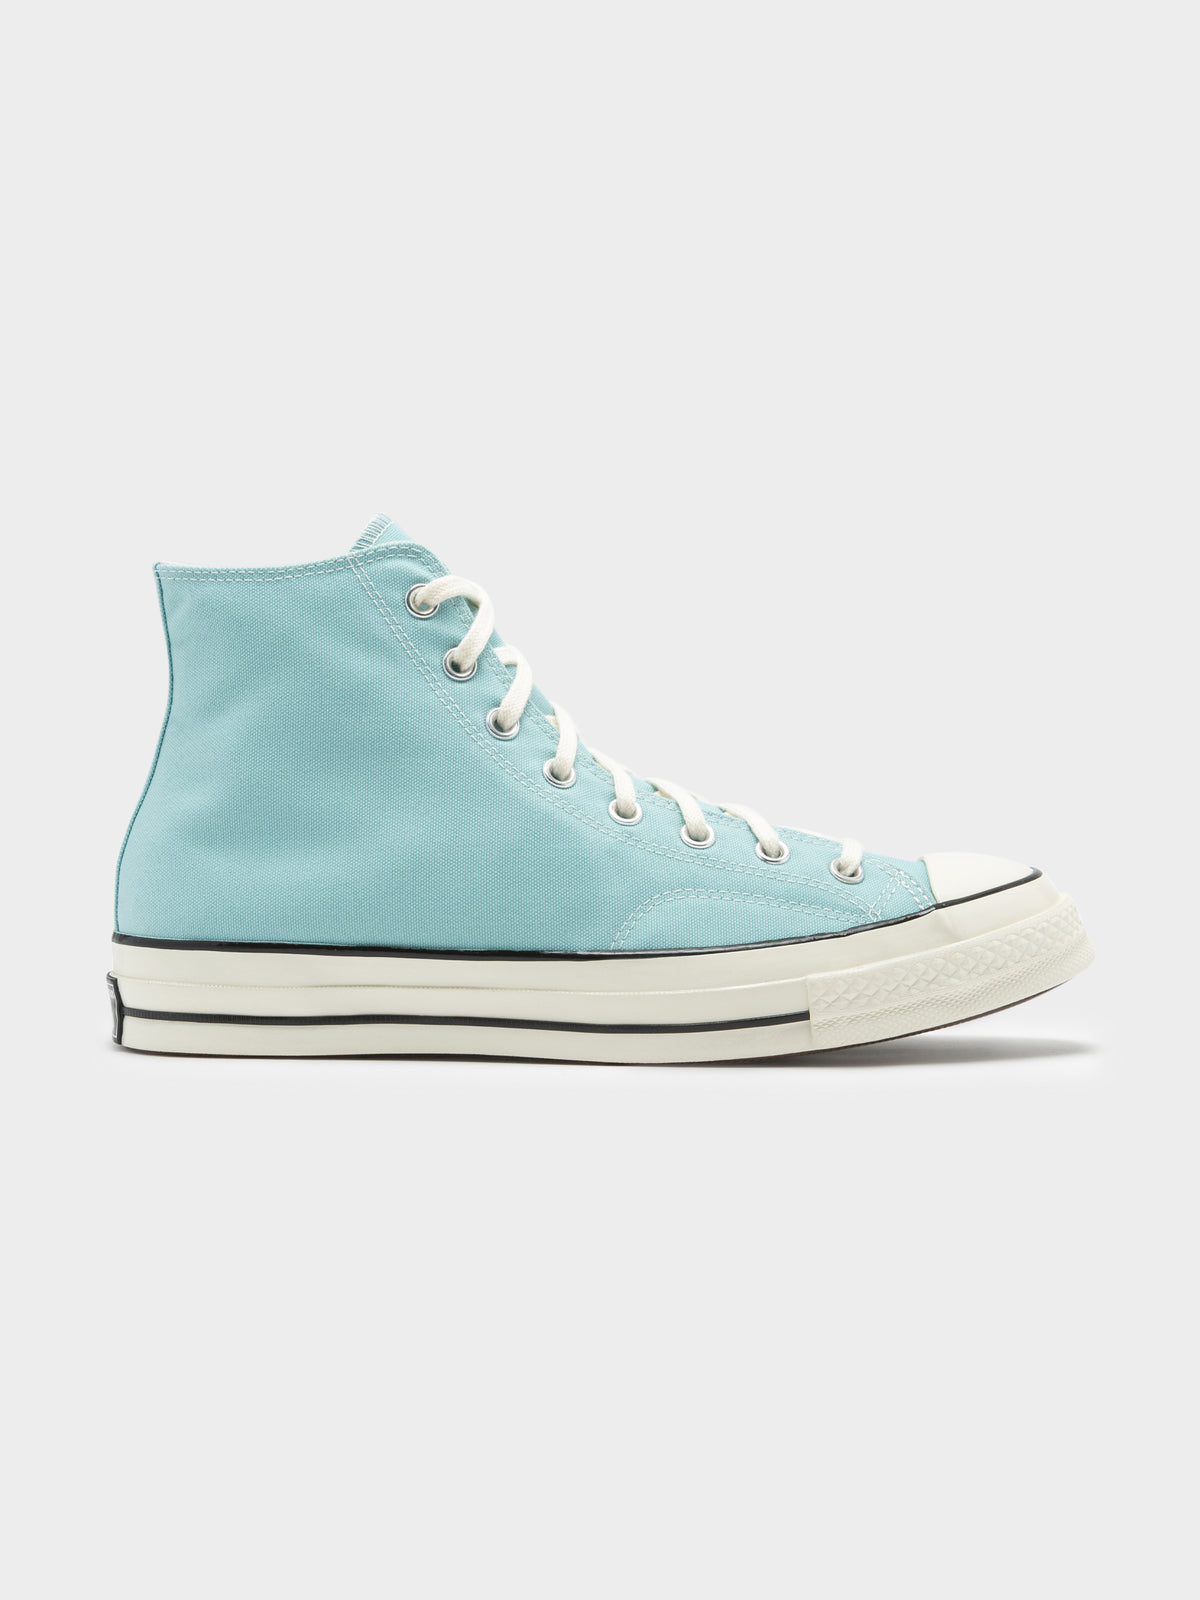 Unisex Chuck Taylor No Waste Canvas in Light Green